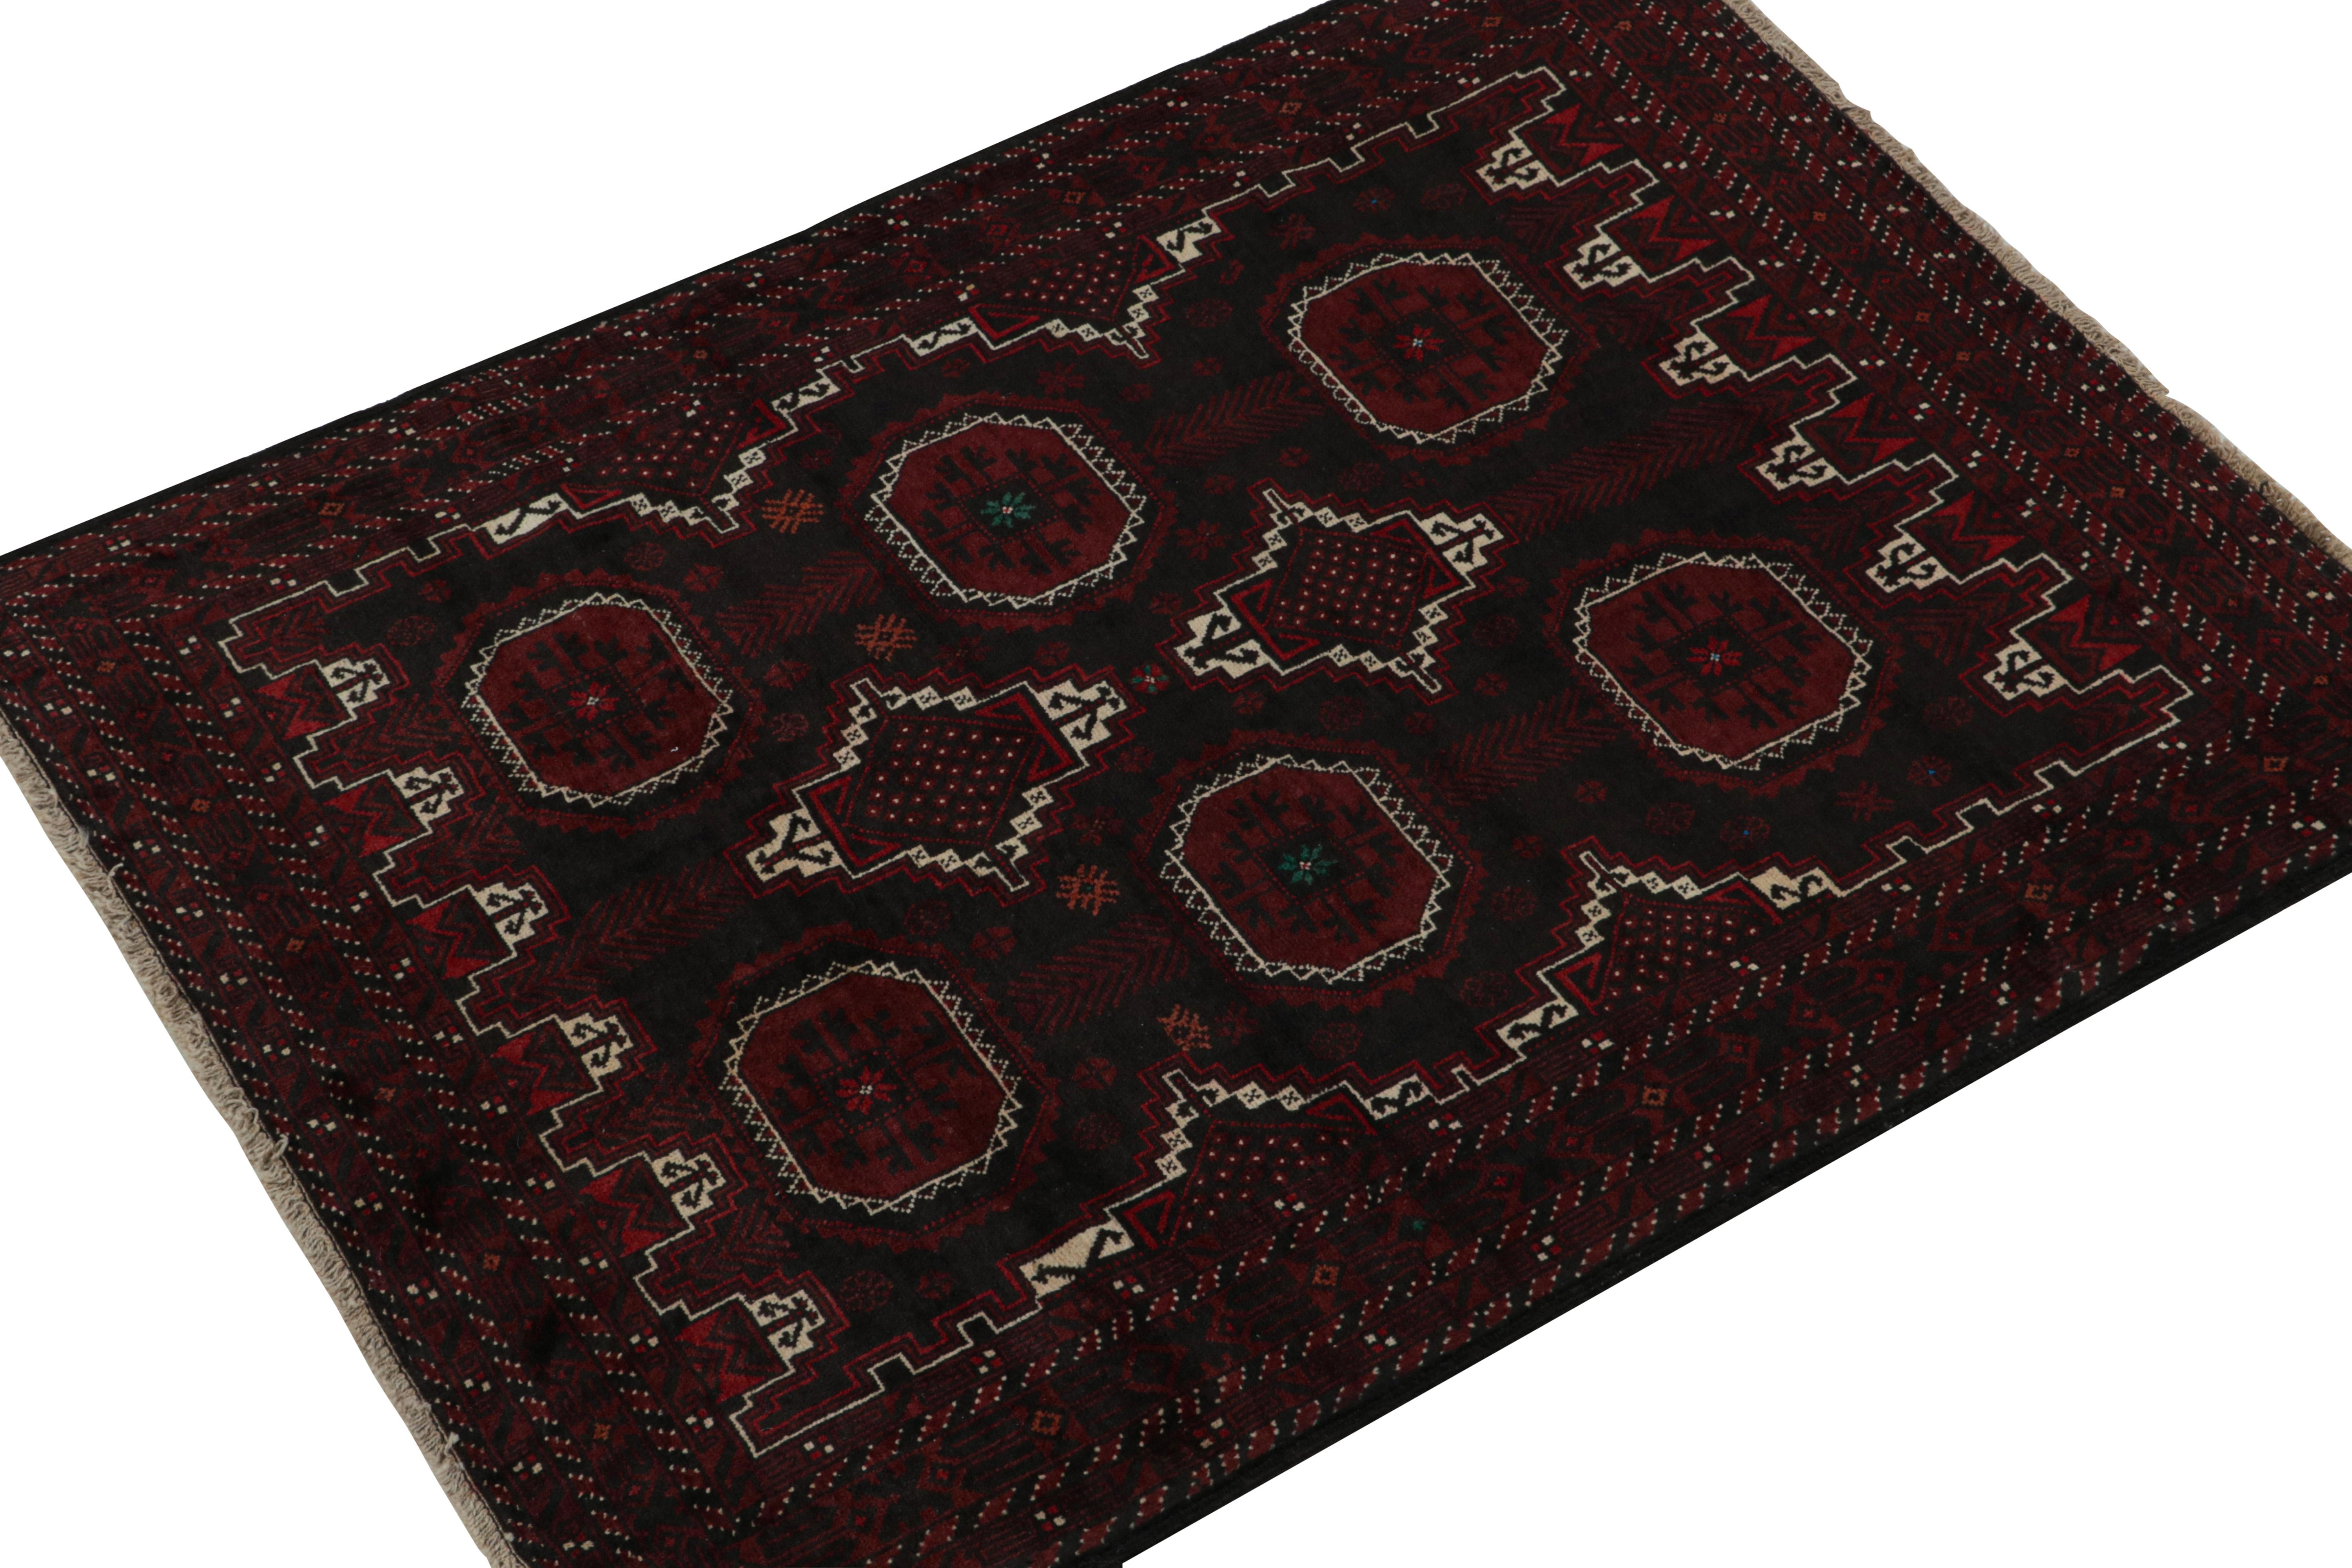 Hand-knotted in wool & goat hair, this vintage tribal rug of the 1950s is a coveted addition to Rug & Kilim’s Antique & Vintage collection. 

On the Design: 

Coming from the Baluch tribe, this 4x5 rug boasts patterns in rich tones of red, black